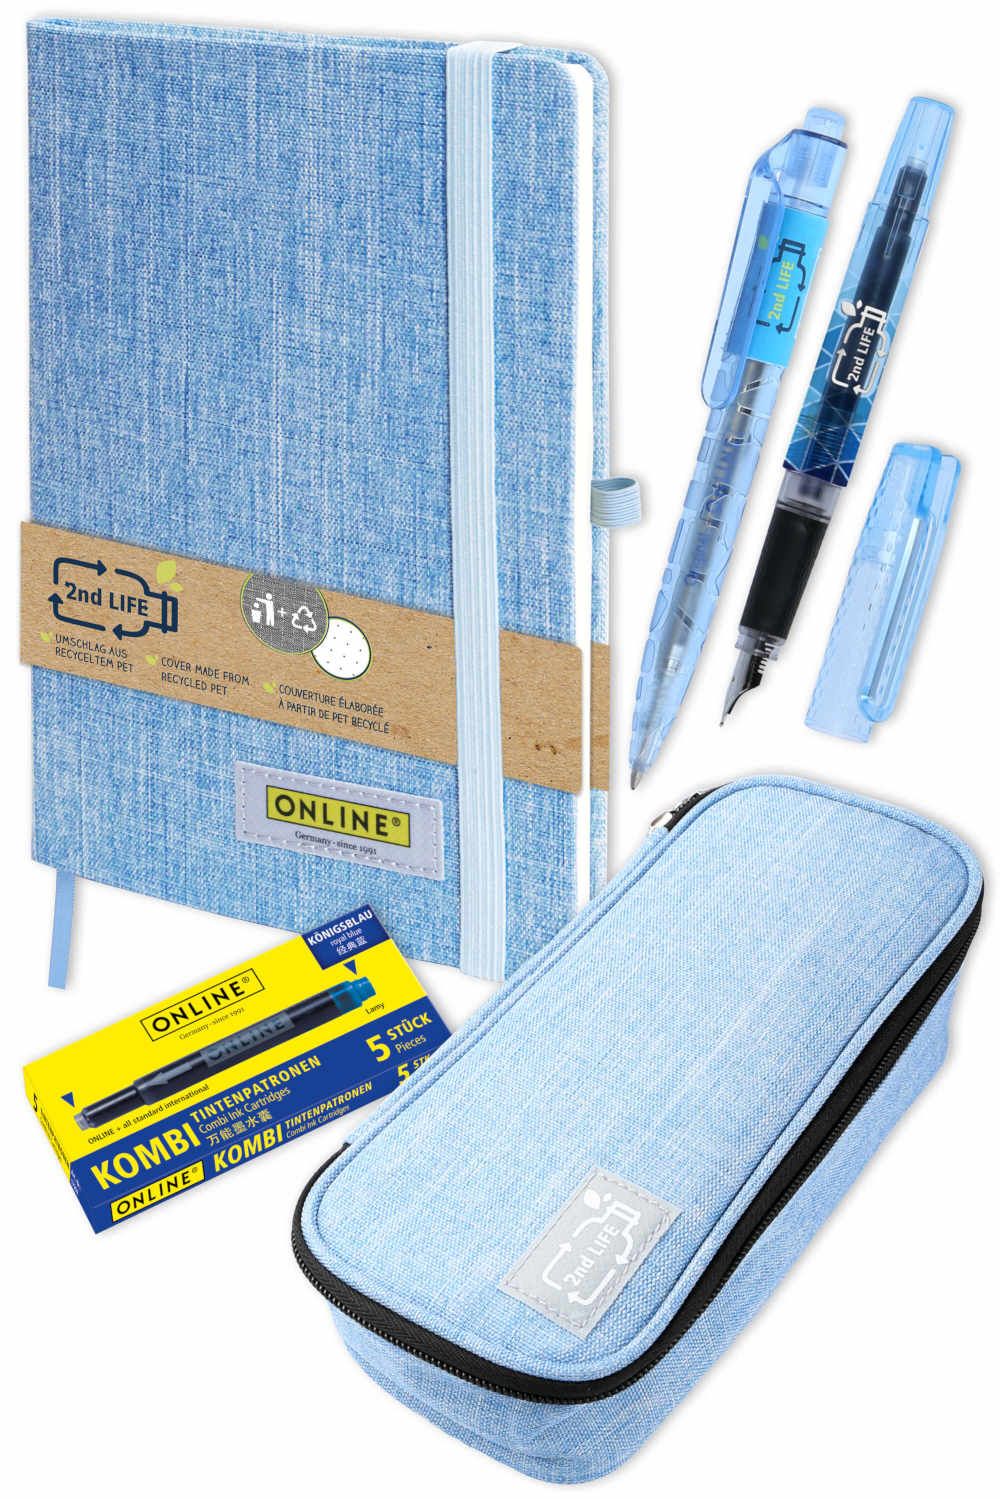 Set 2nd LIFE incl. notebook A5, fountain pen, ball pen, pencil case and ink cartridges